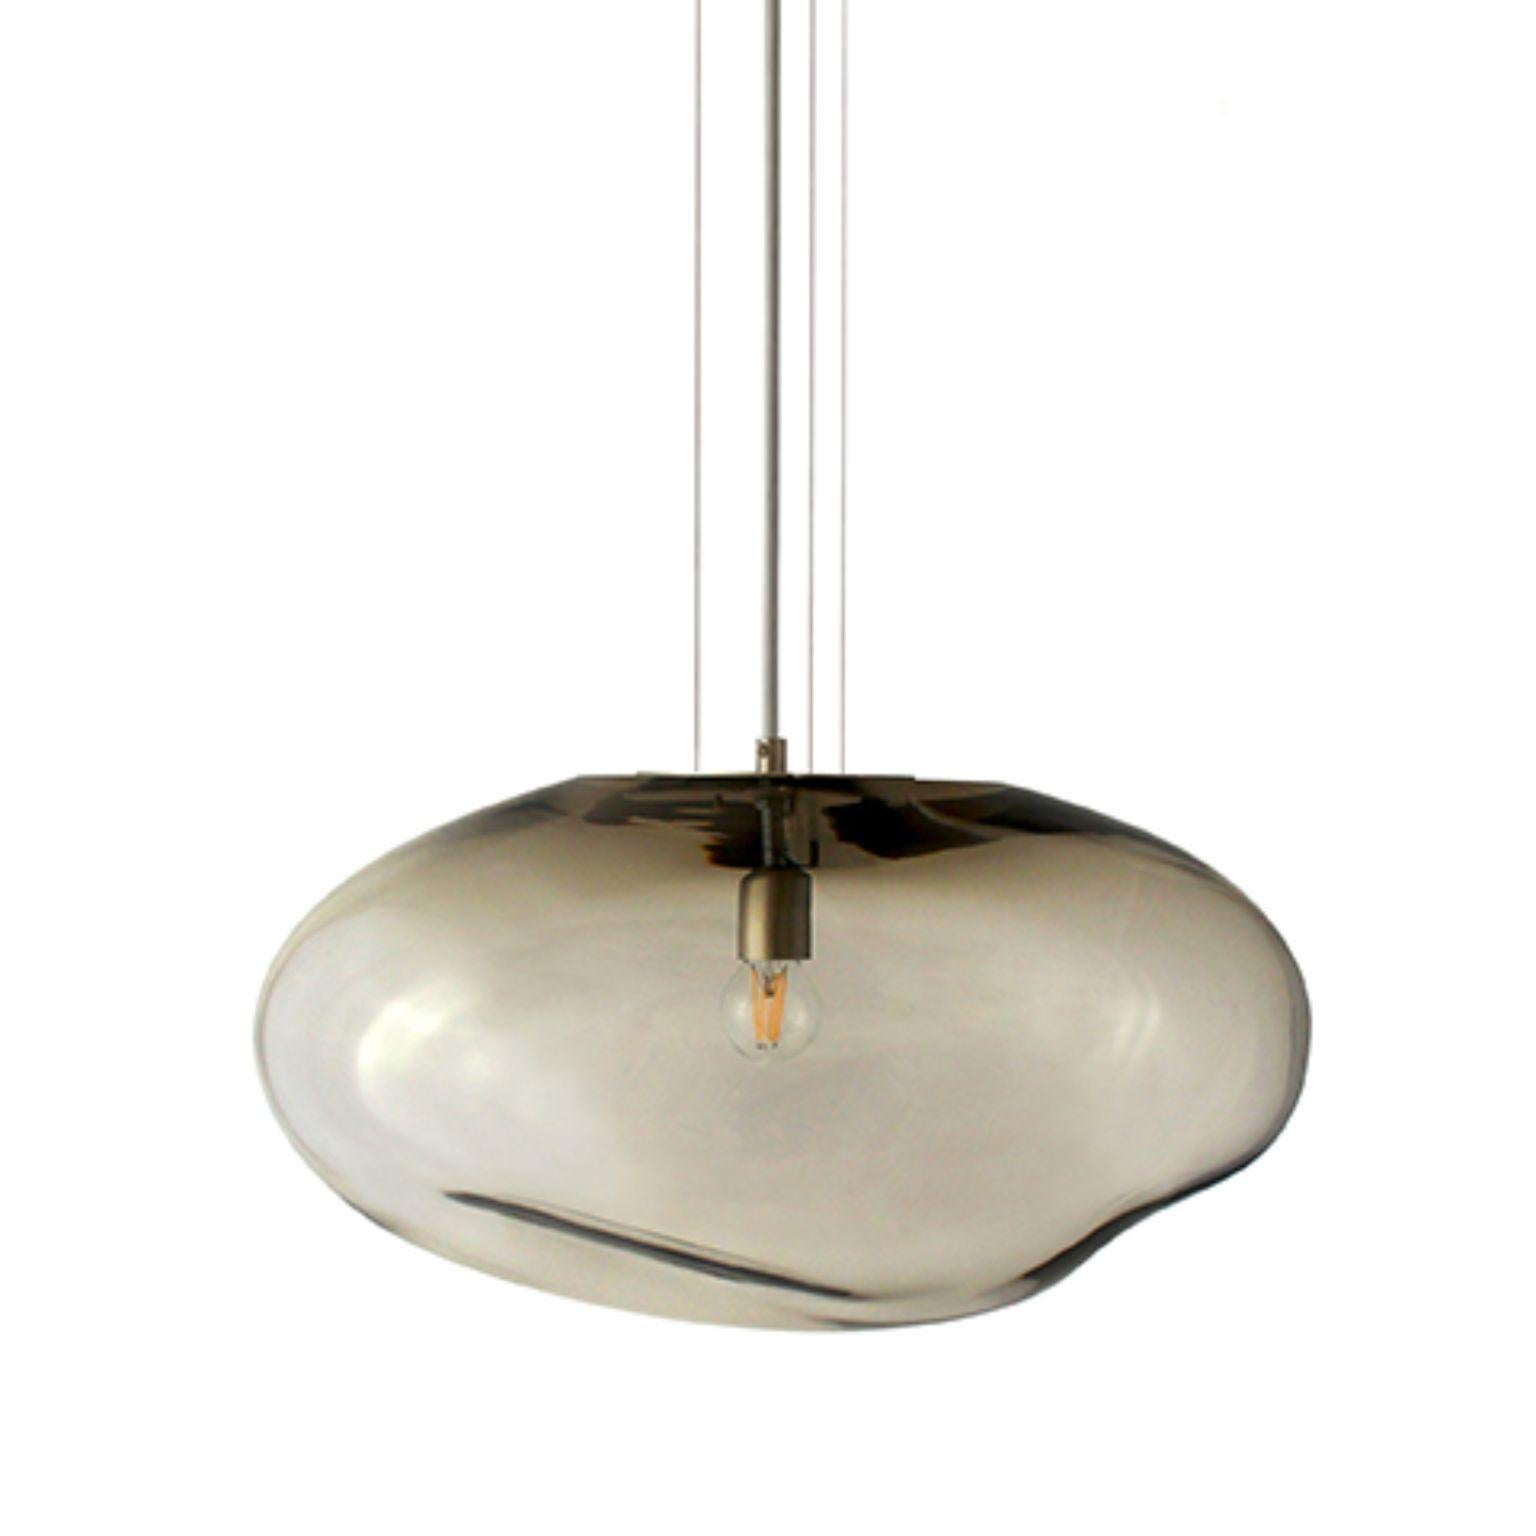 Haumea Amorph silver smoke L pendant by ELOA
Material: Glass, steel, silver, LED Bulb
Dimensions: D 27 x W 39 x H 30 cm
Also available in different colours and dimensions.

All our lamps can be wired according to each country. If sold to the